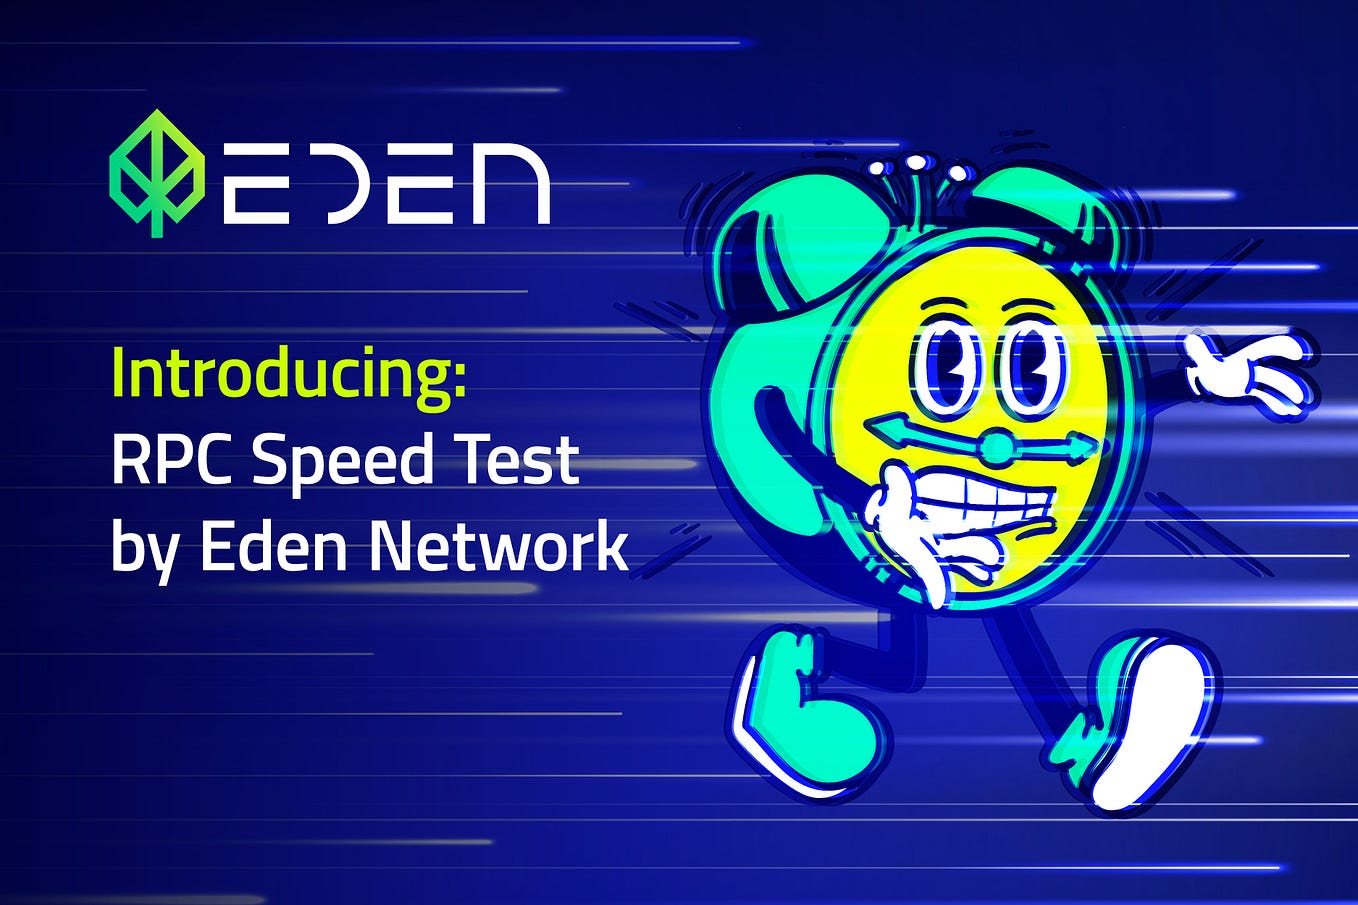 Introducing: RPC Speed Test by Eden Network